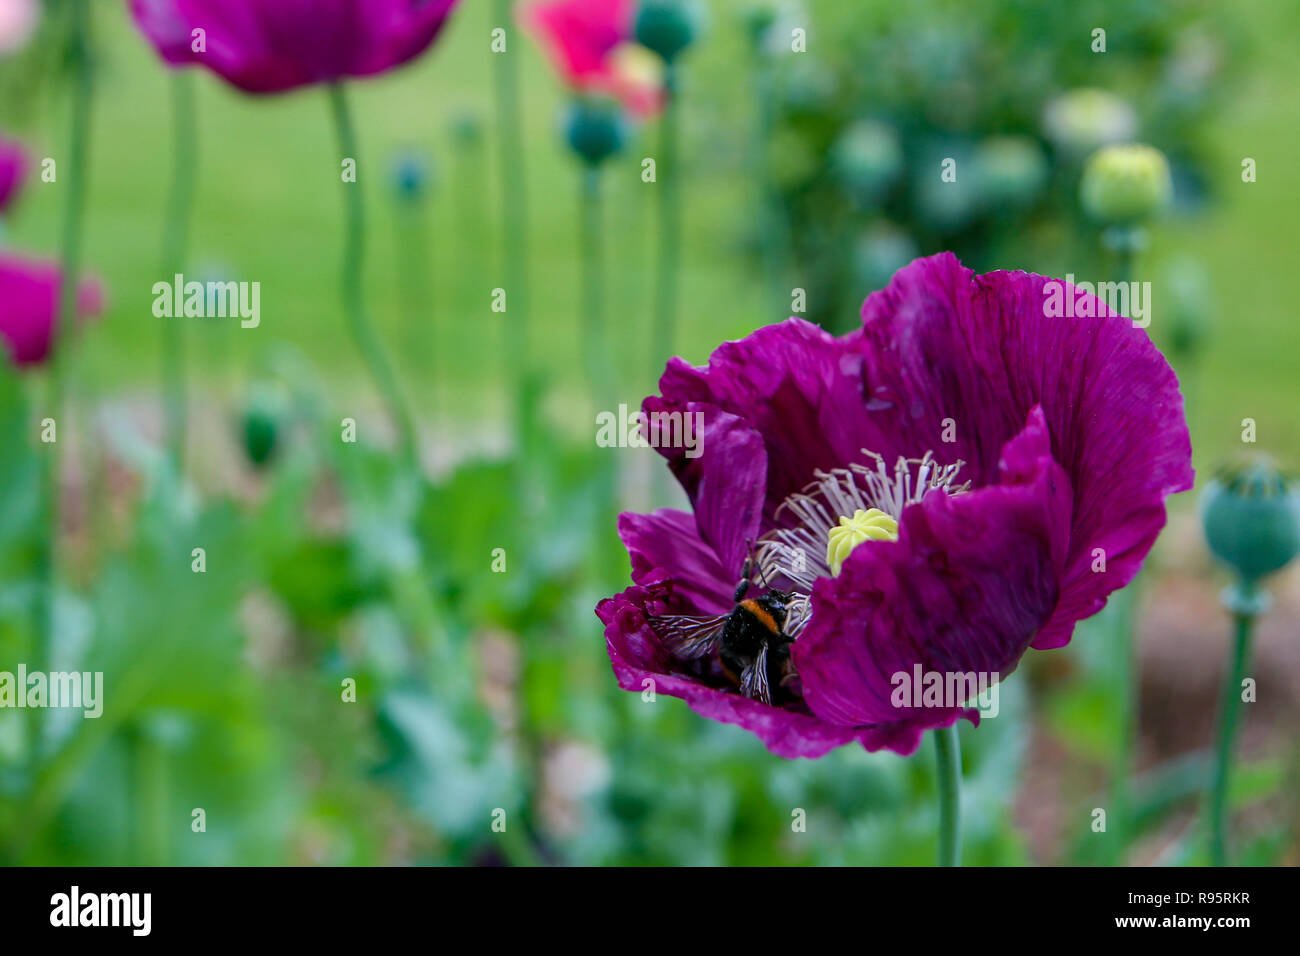 Beautiful poppy flowers with vibrant colors in a garden Stock Photo